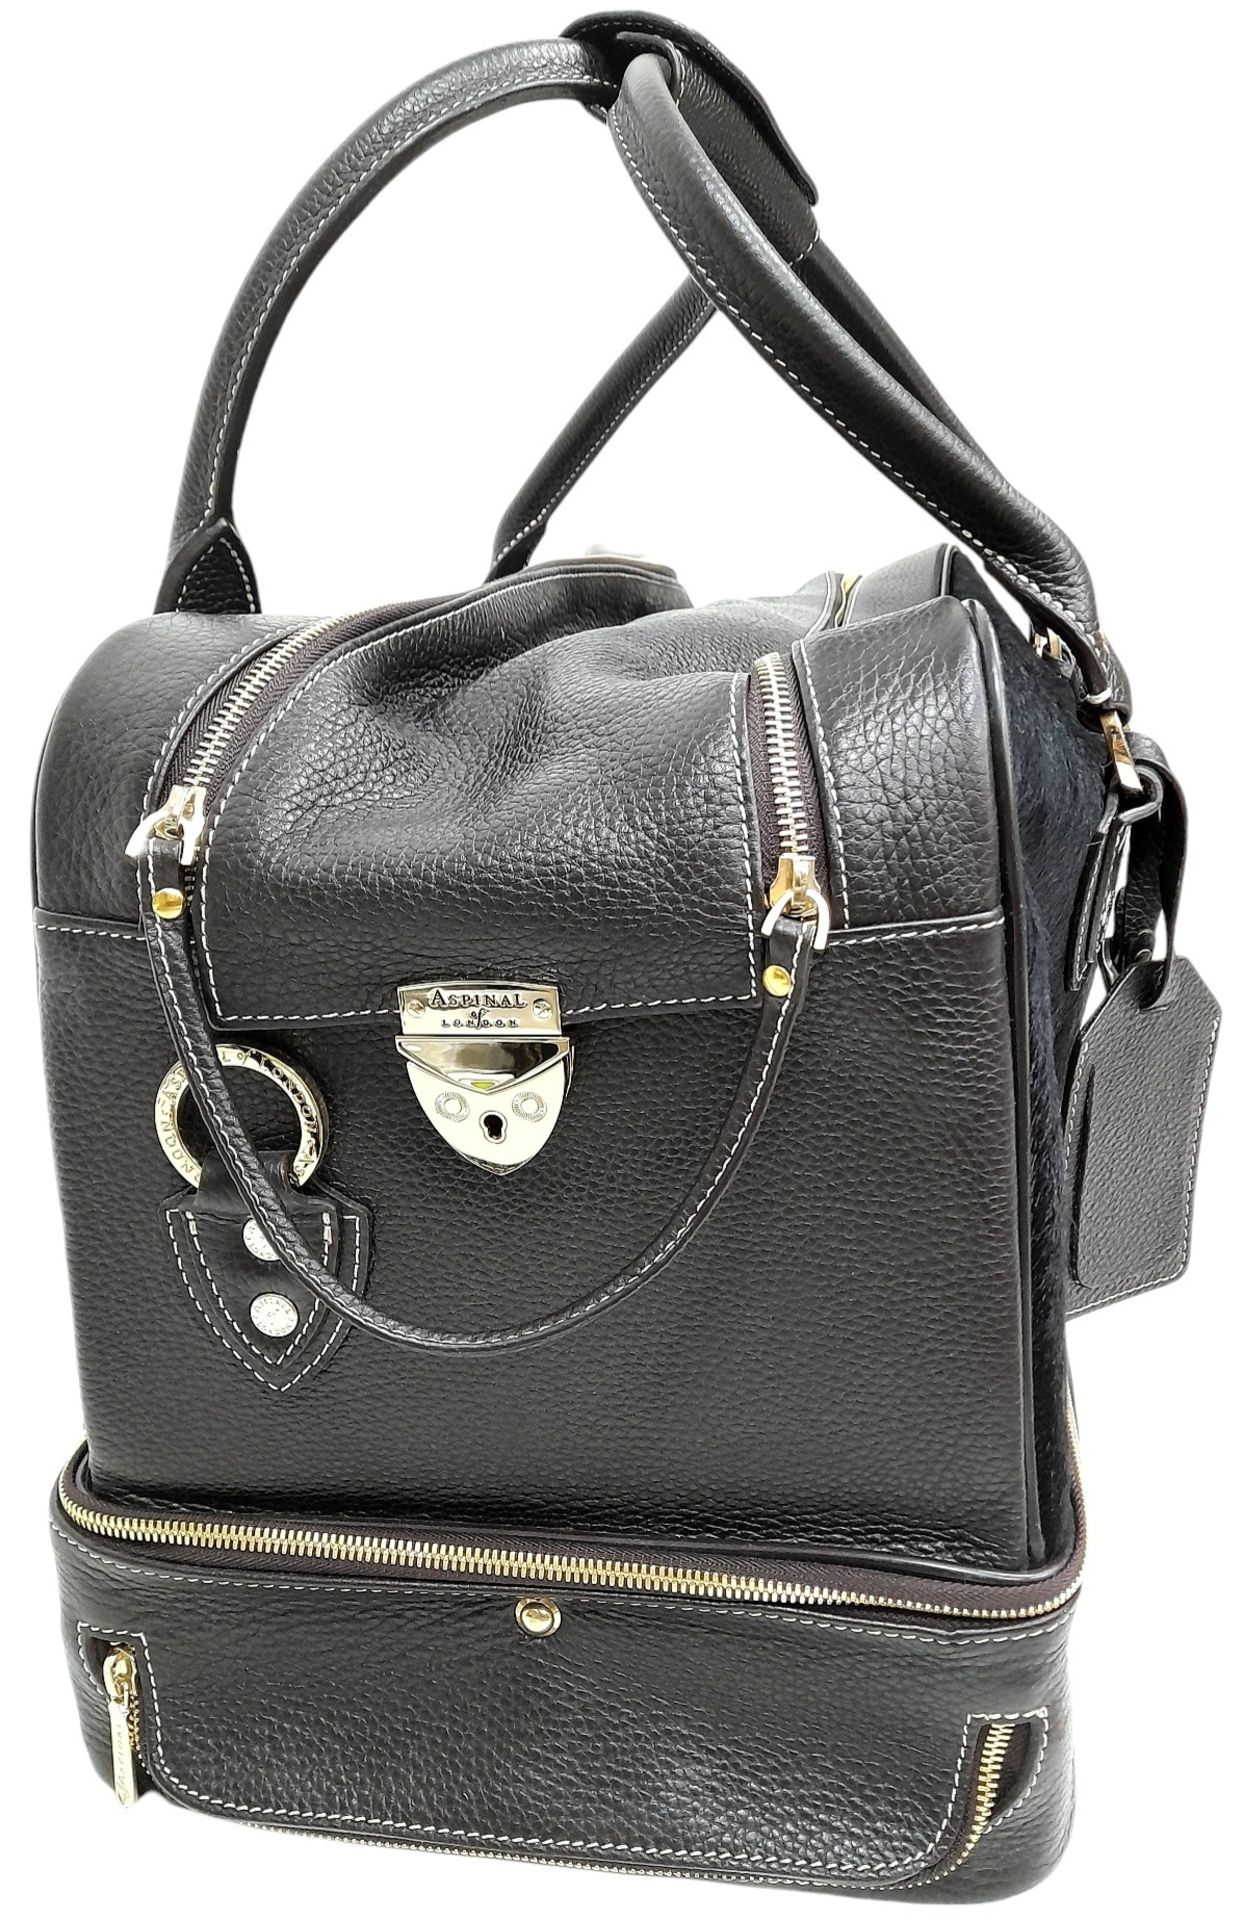 An Aspinal Brown Portofino Convertible Luggage Bag. Leather and pony fur exterior with gold-toned - Image 16 of 16